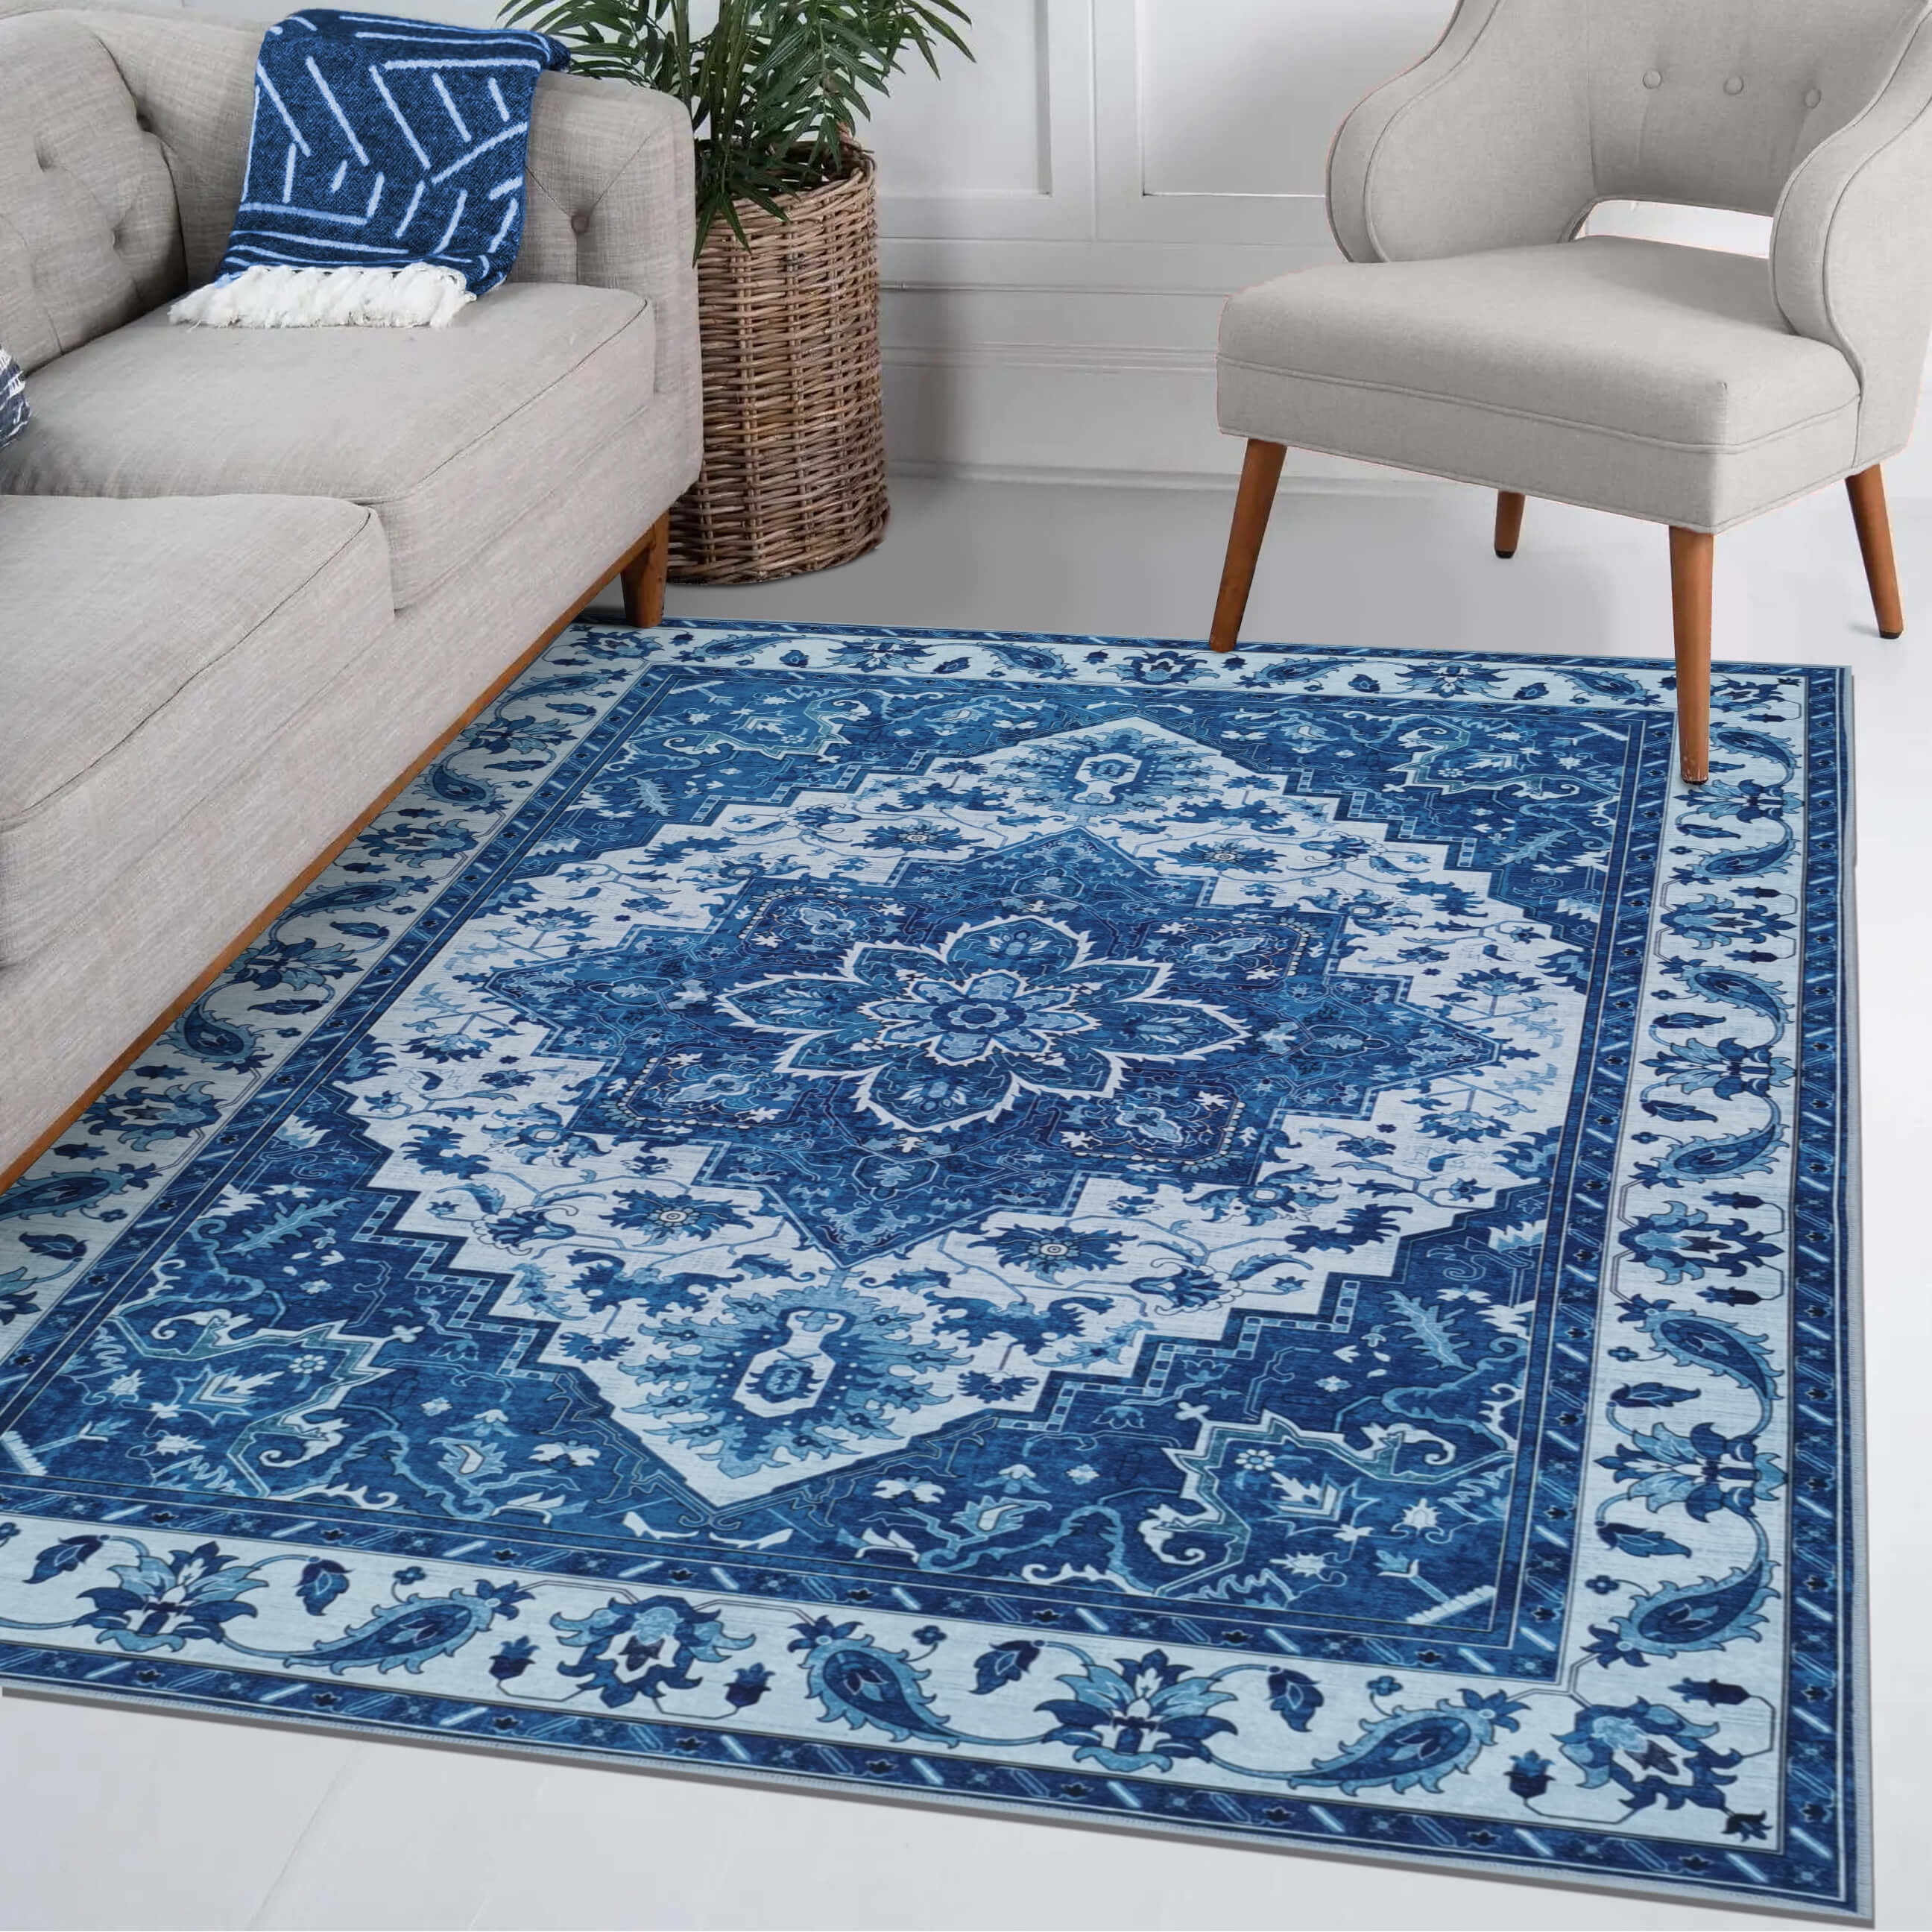 Deerly 5x7 Rug Washable Area Rugs for Living Room, Non Slip Large Rug for  Bedroom Dining Room, Low-Pile Kid & Pet Friendly Distressed Carpet Print